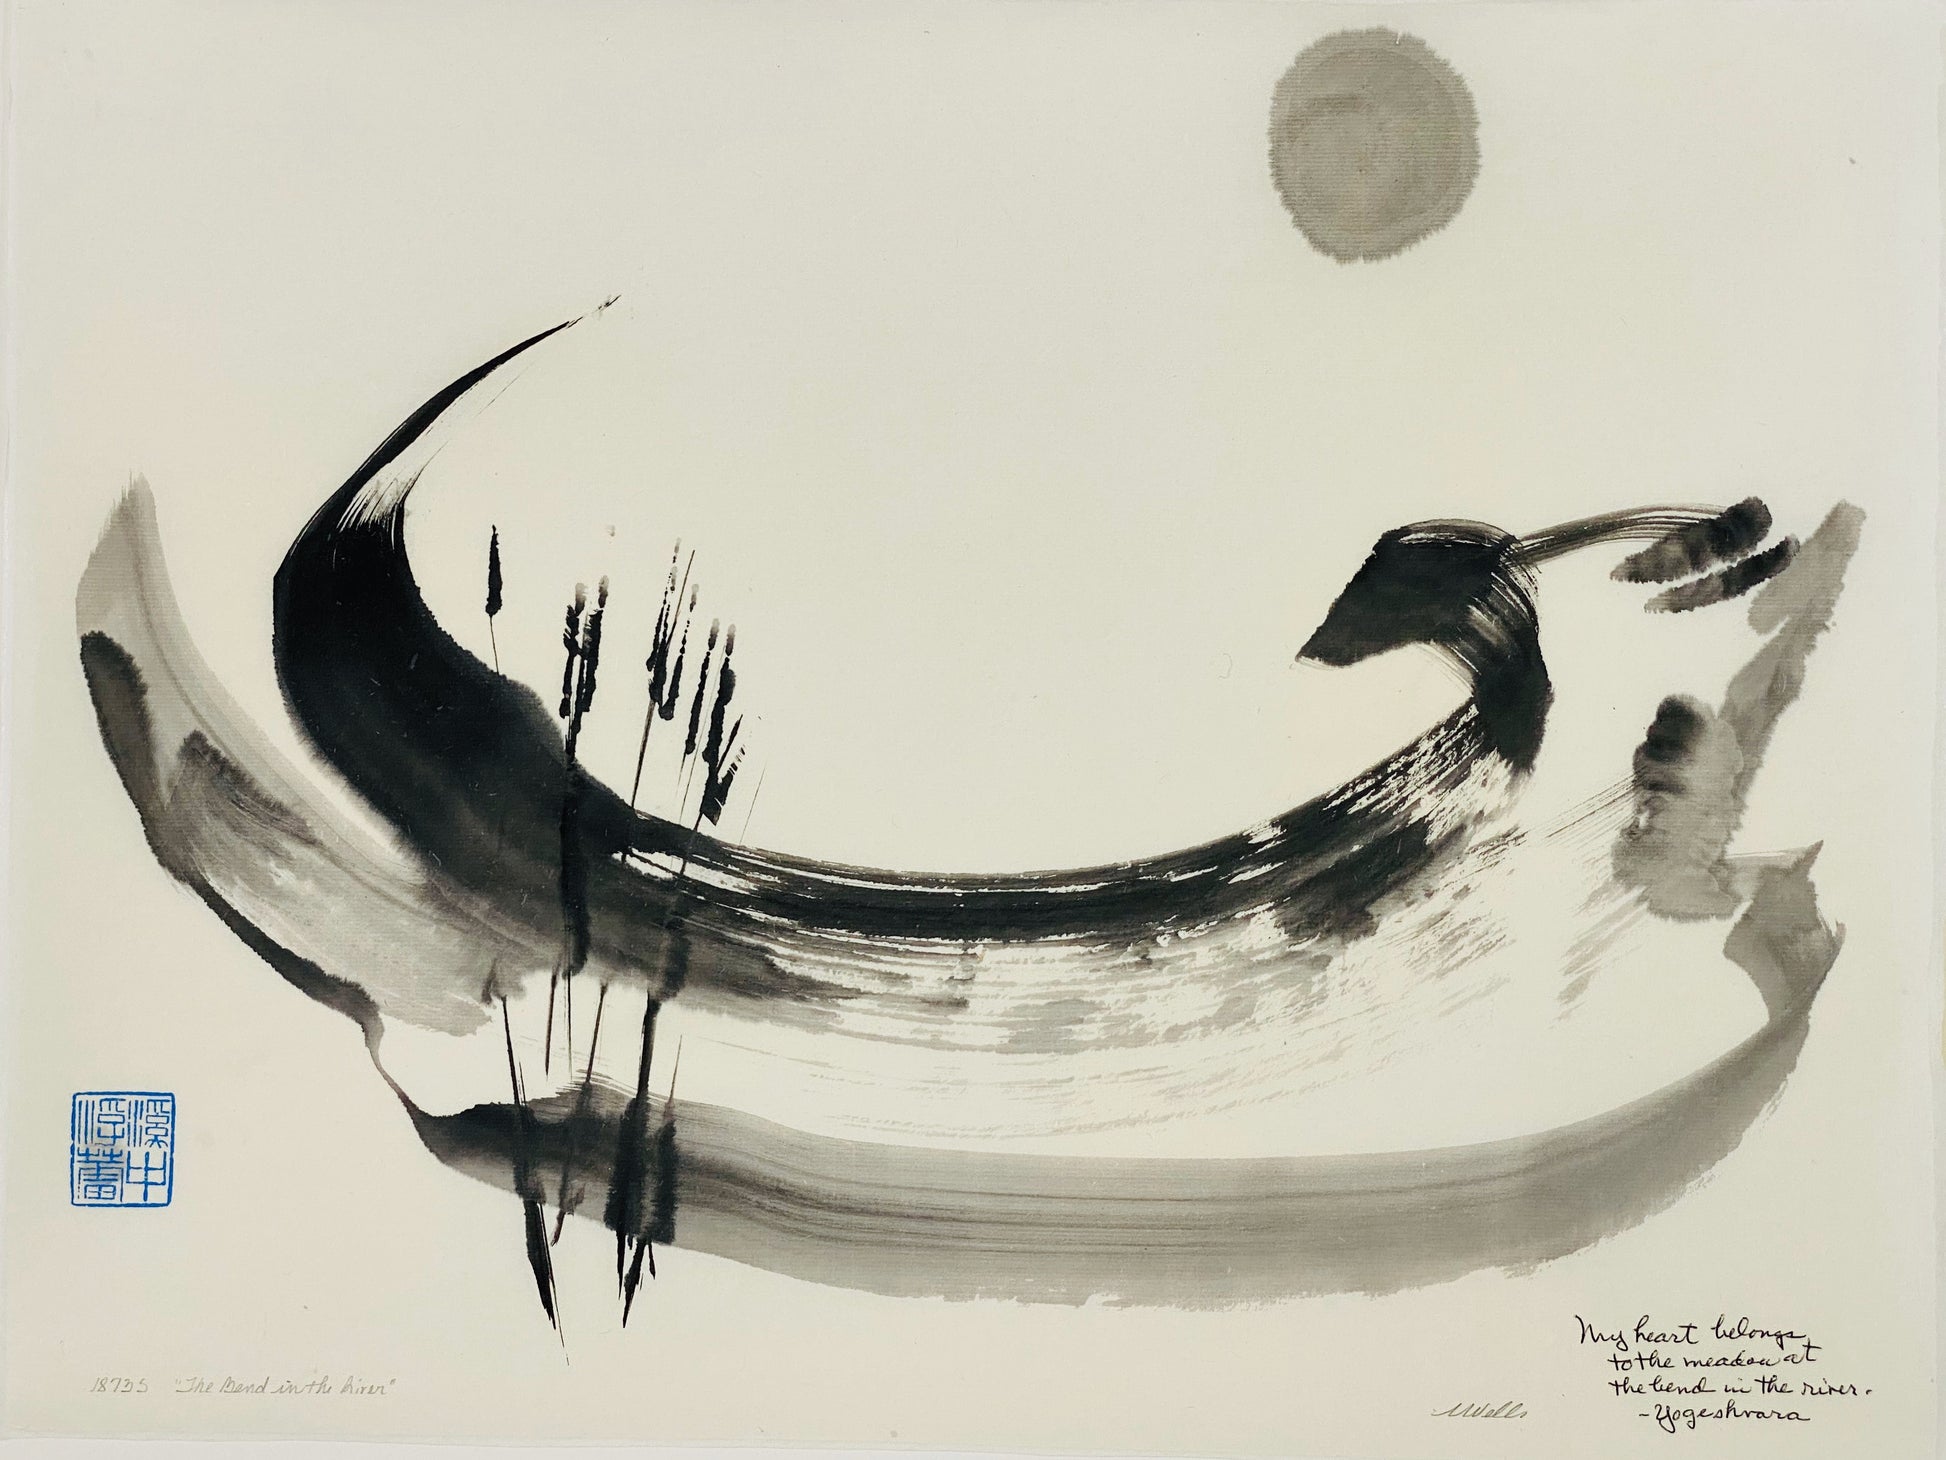 Abstract sumi e Original“The Bend in the River” by Marilyn Wells